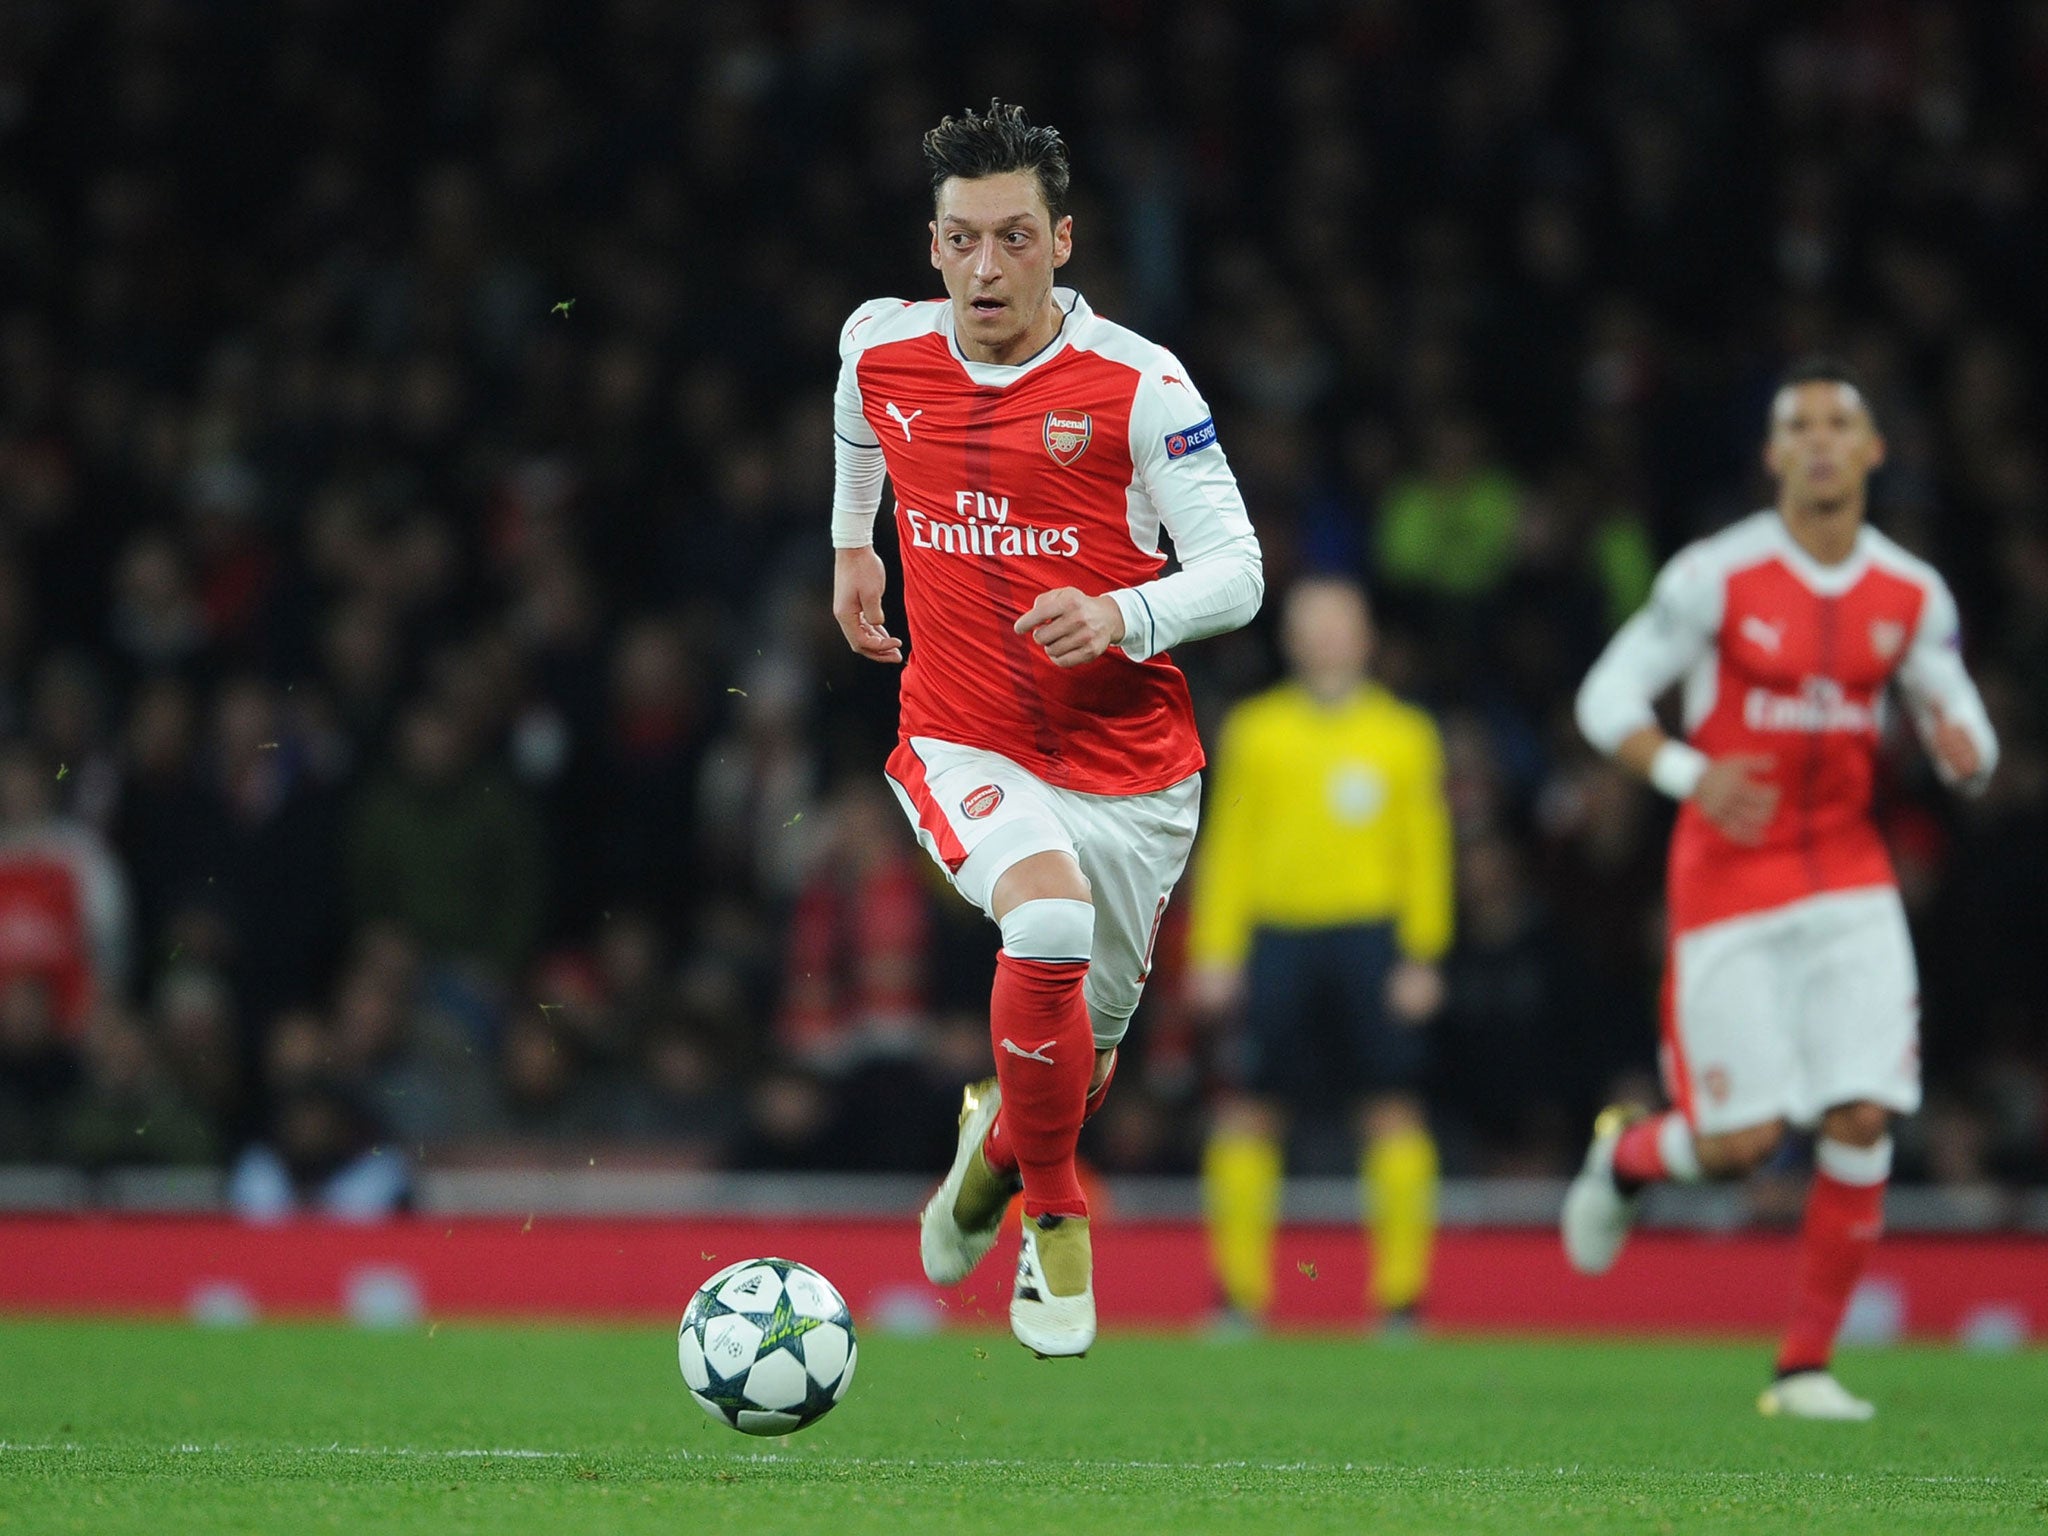 Mesut Özil is currently in contract talks with Arsenal despite links with Real Madrid